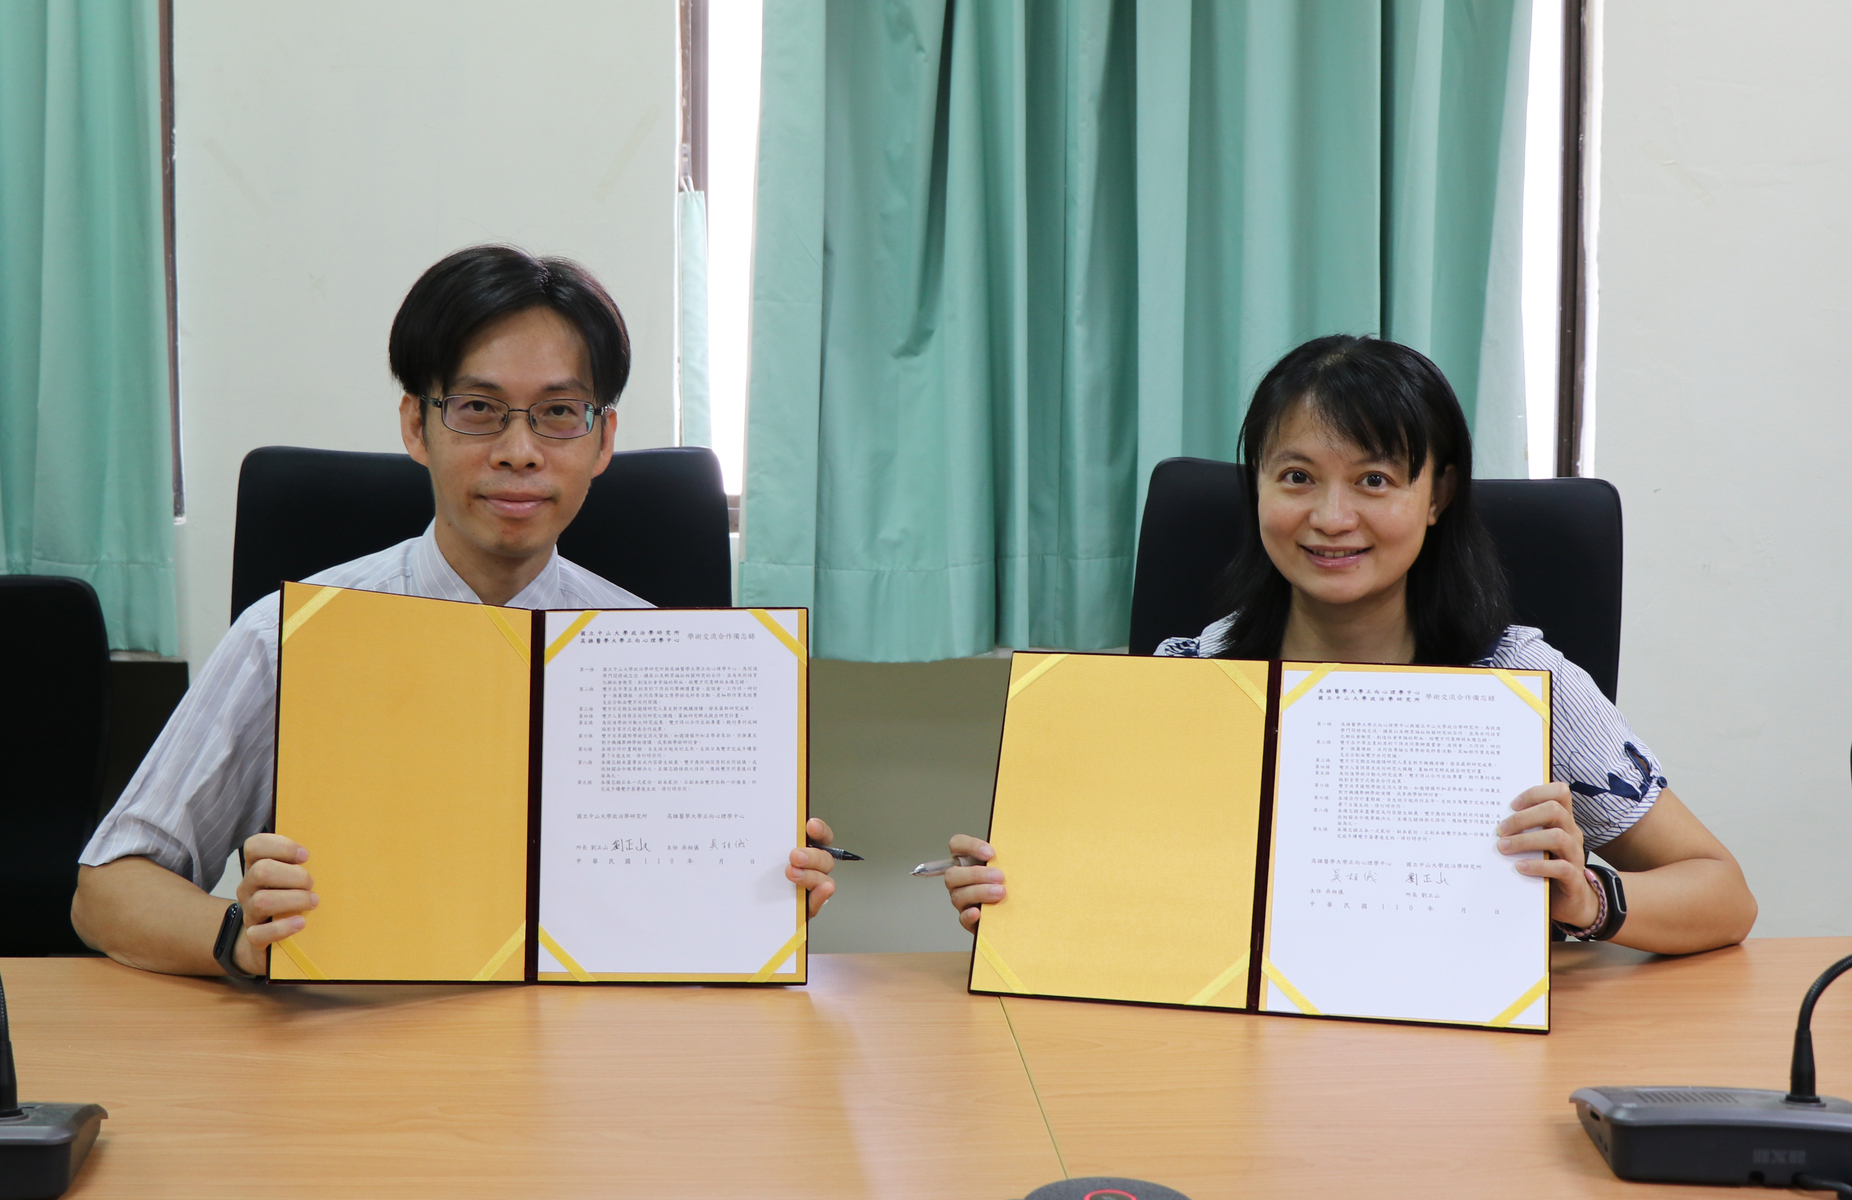 Director of NSYSU Institute of Political Science Cheng-Shan Liu and Director of Kaohsiung Medical University Positive Psychology Center Hsiang-Yi Wu signed a letter of intent on cooperation.